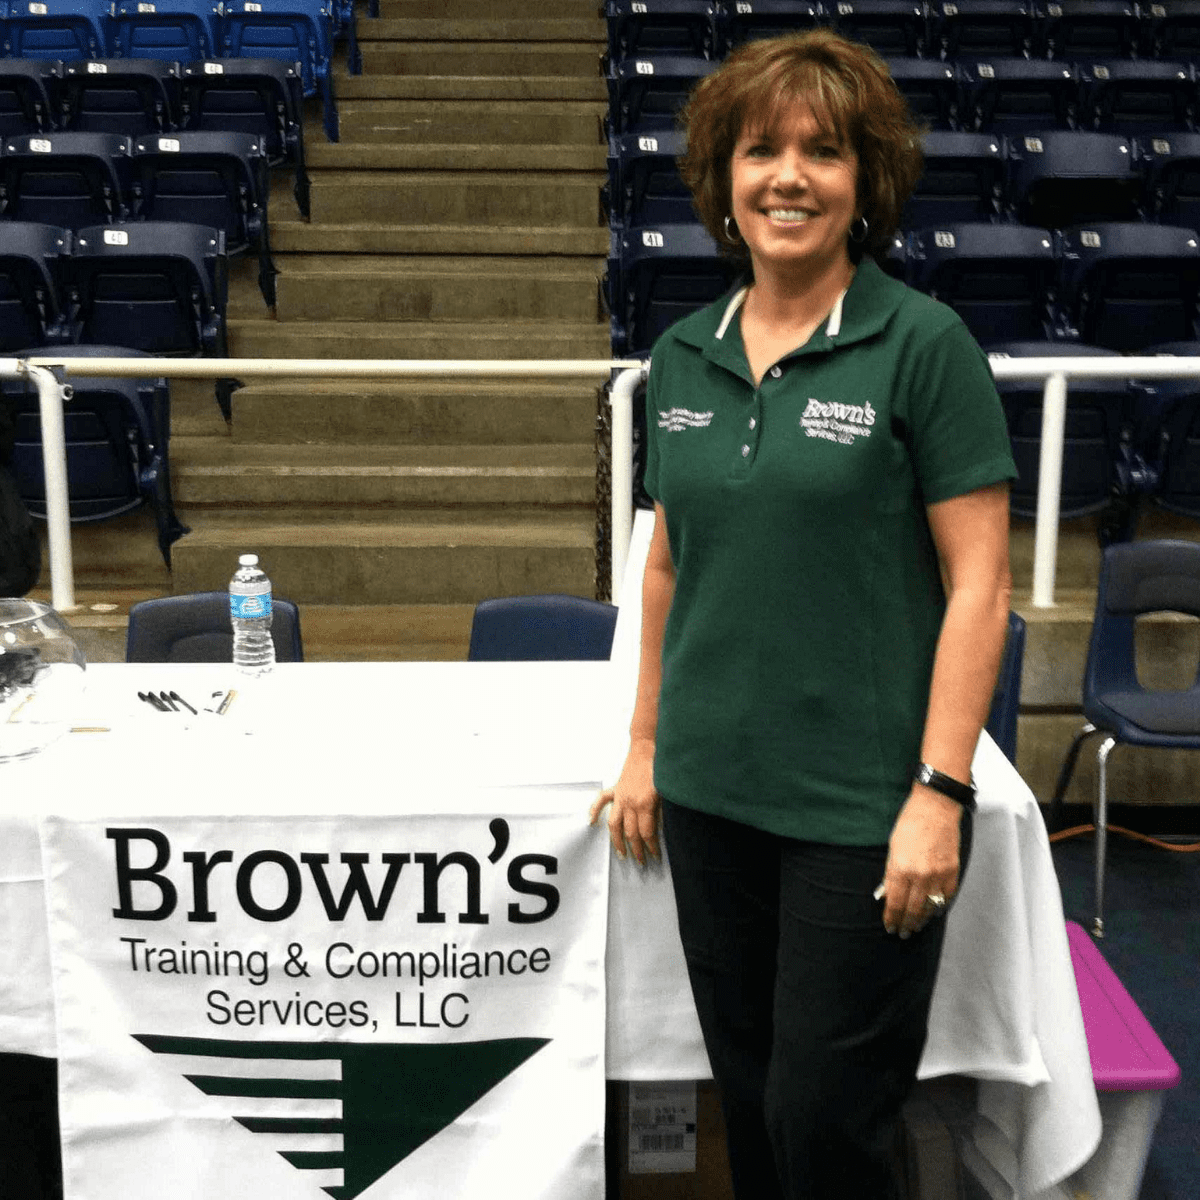 Pam Moose, Founder of Brown's Training & Compliance Services in Midland, TX